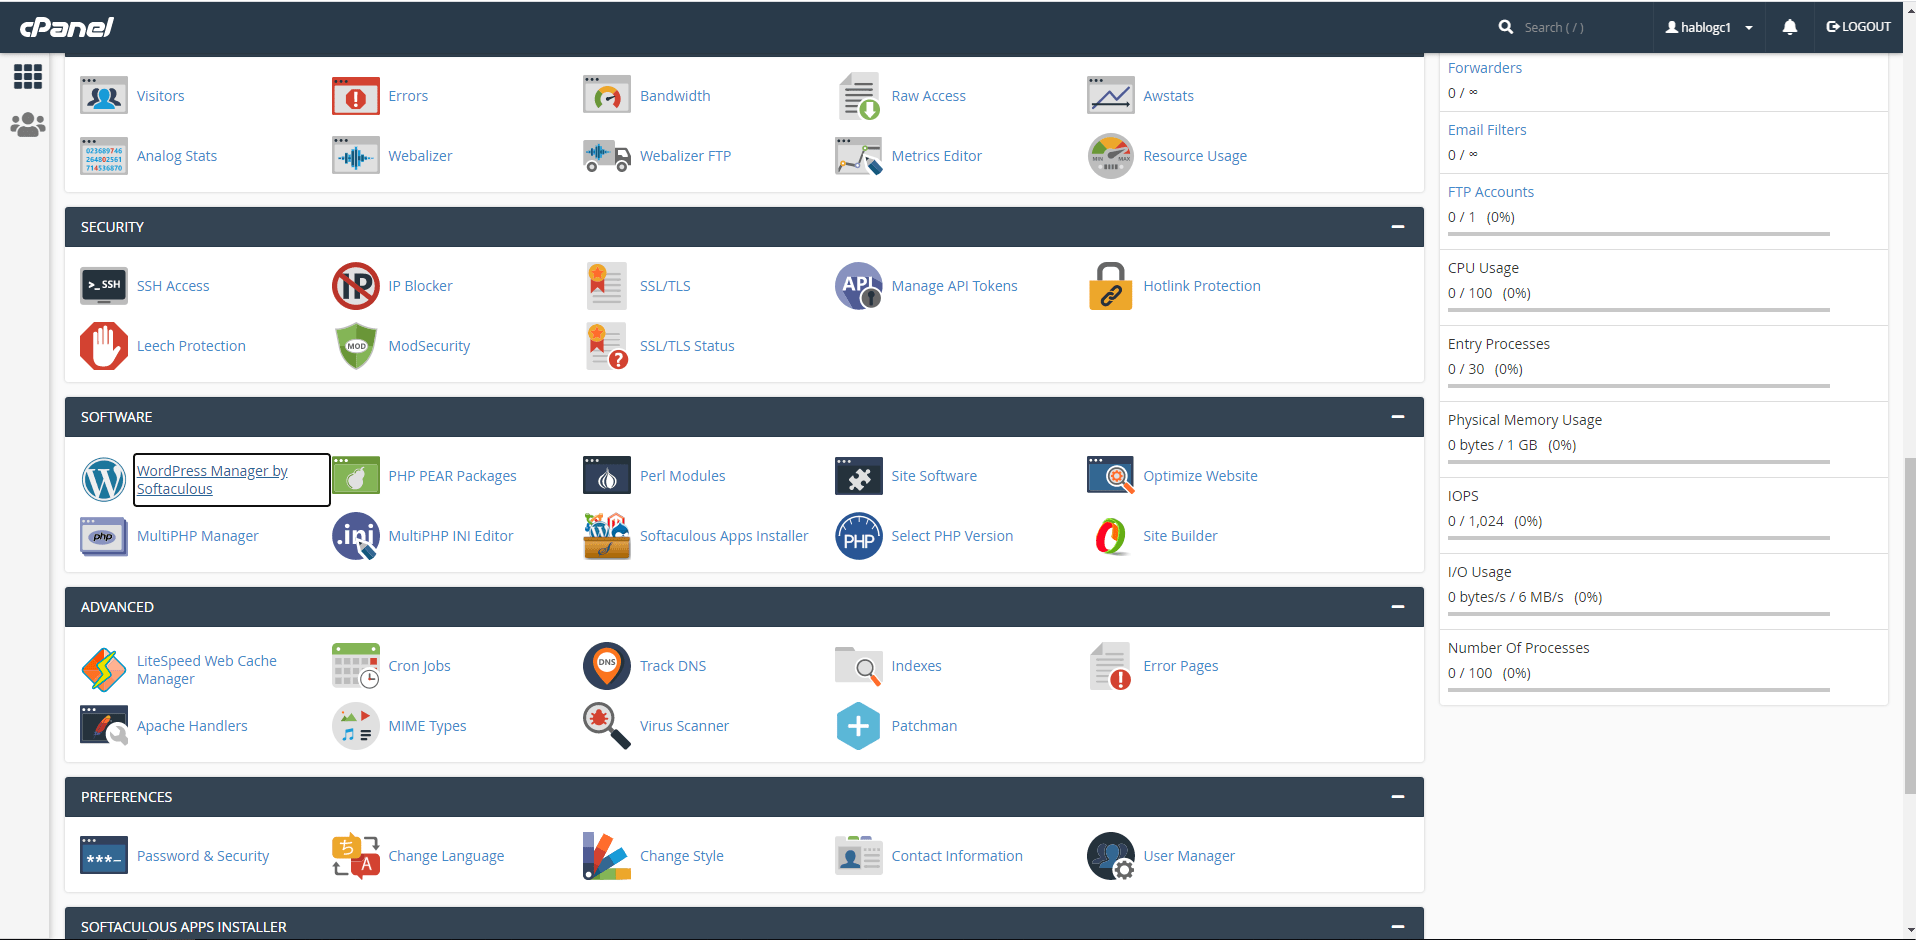 cPanel is the one-stop control panel for all your website management needs.